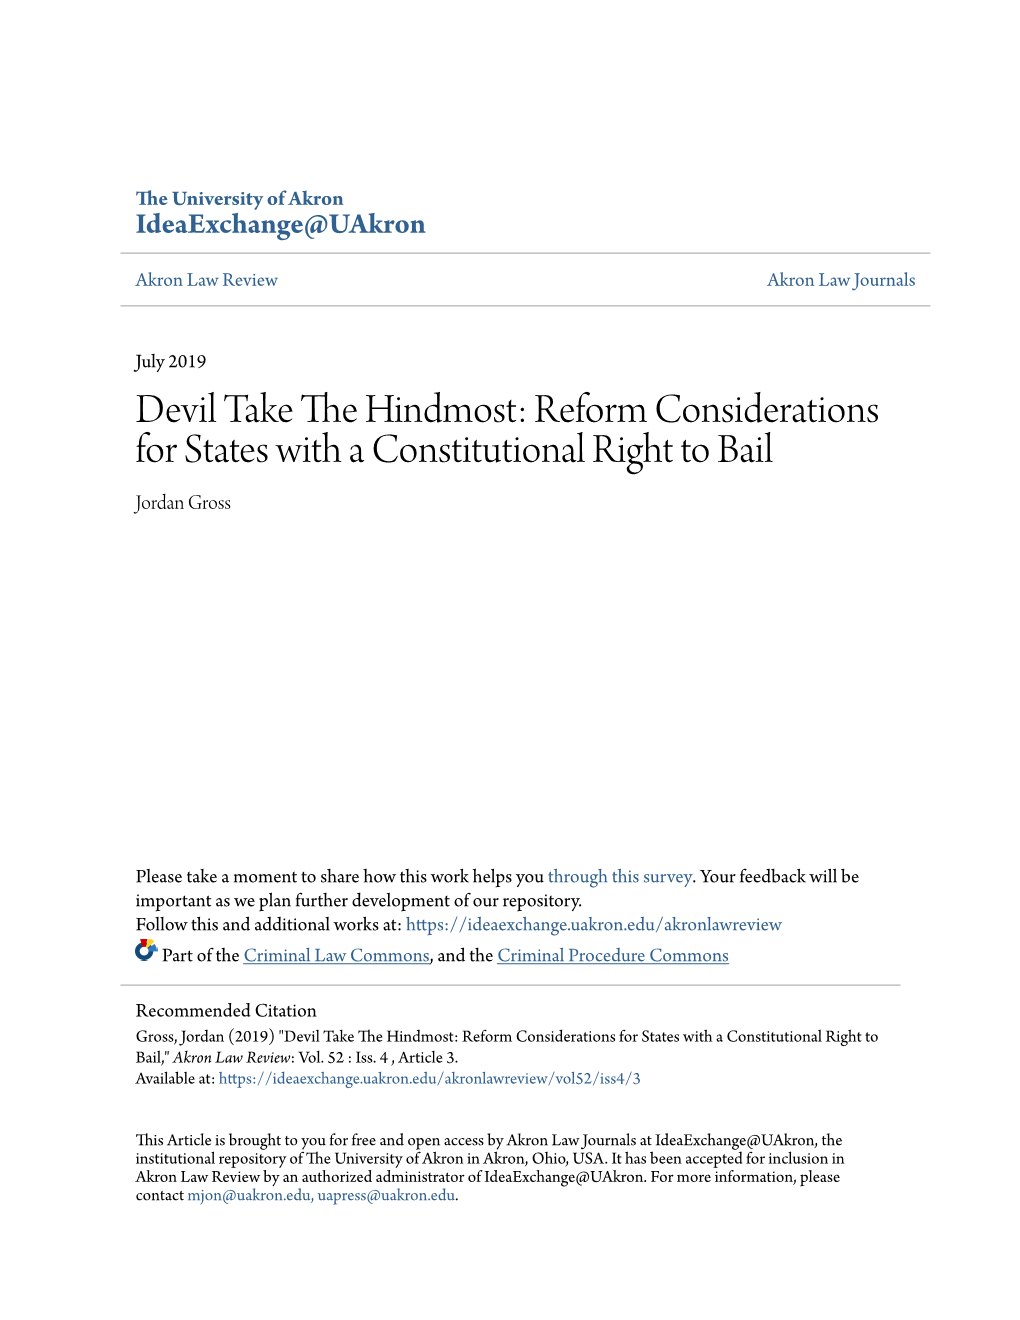 Reform Considerations for States with a Constitutional Right to Bail Jordan Gross